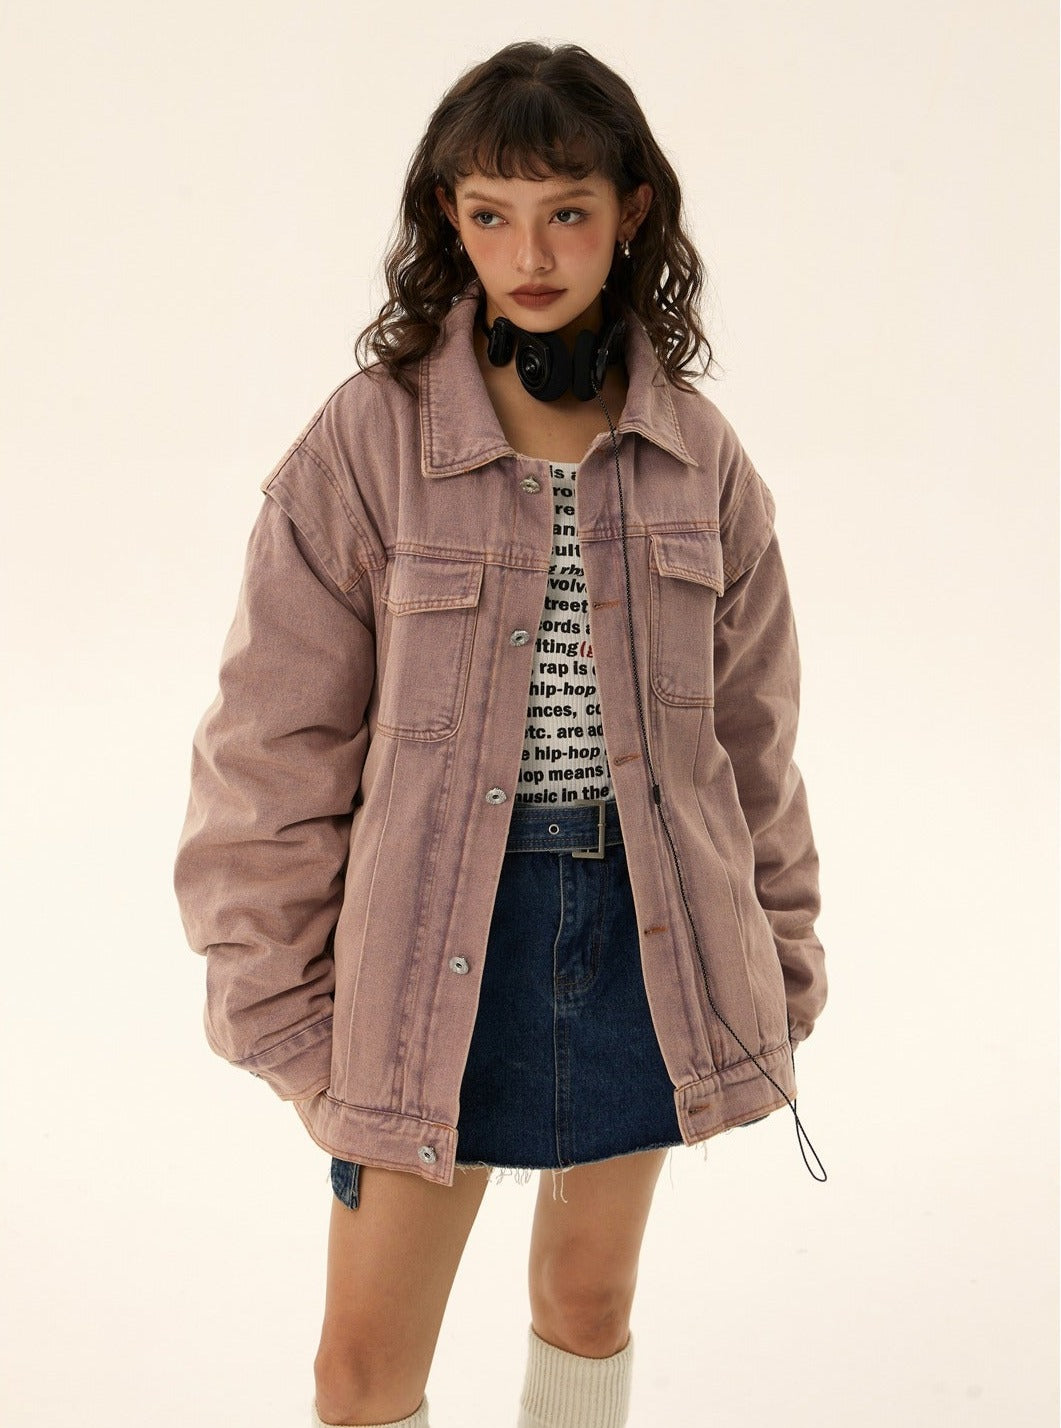 New Long-sleeved Loose Casual Cotton Jacket